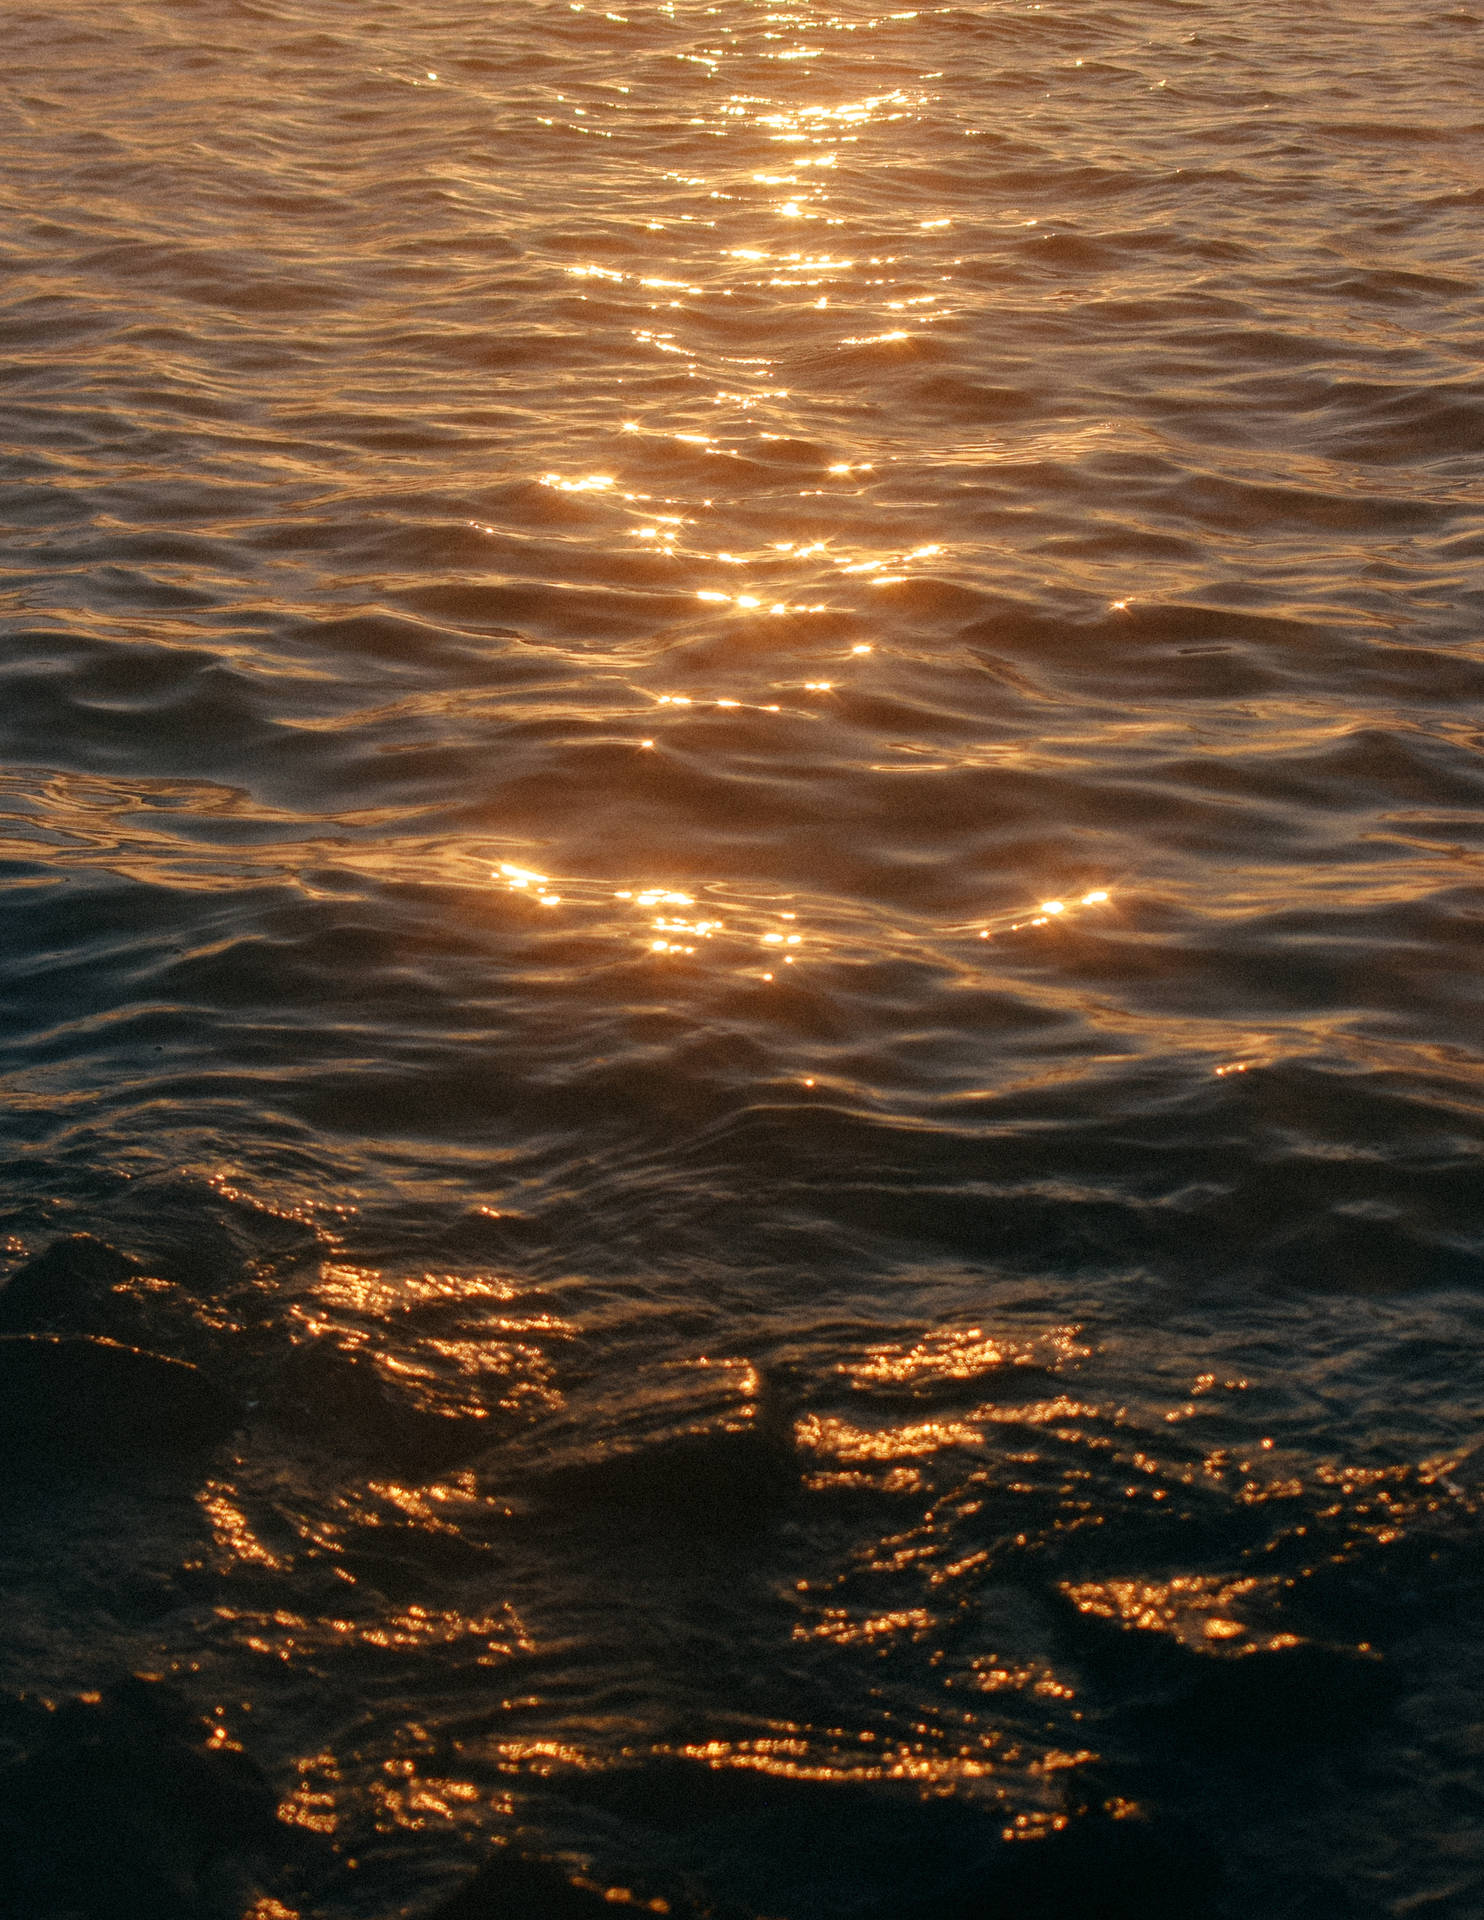 Aesthetic wallpaper of sea waves and sunlight reflection on ocean water. 